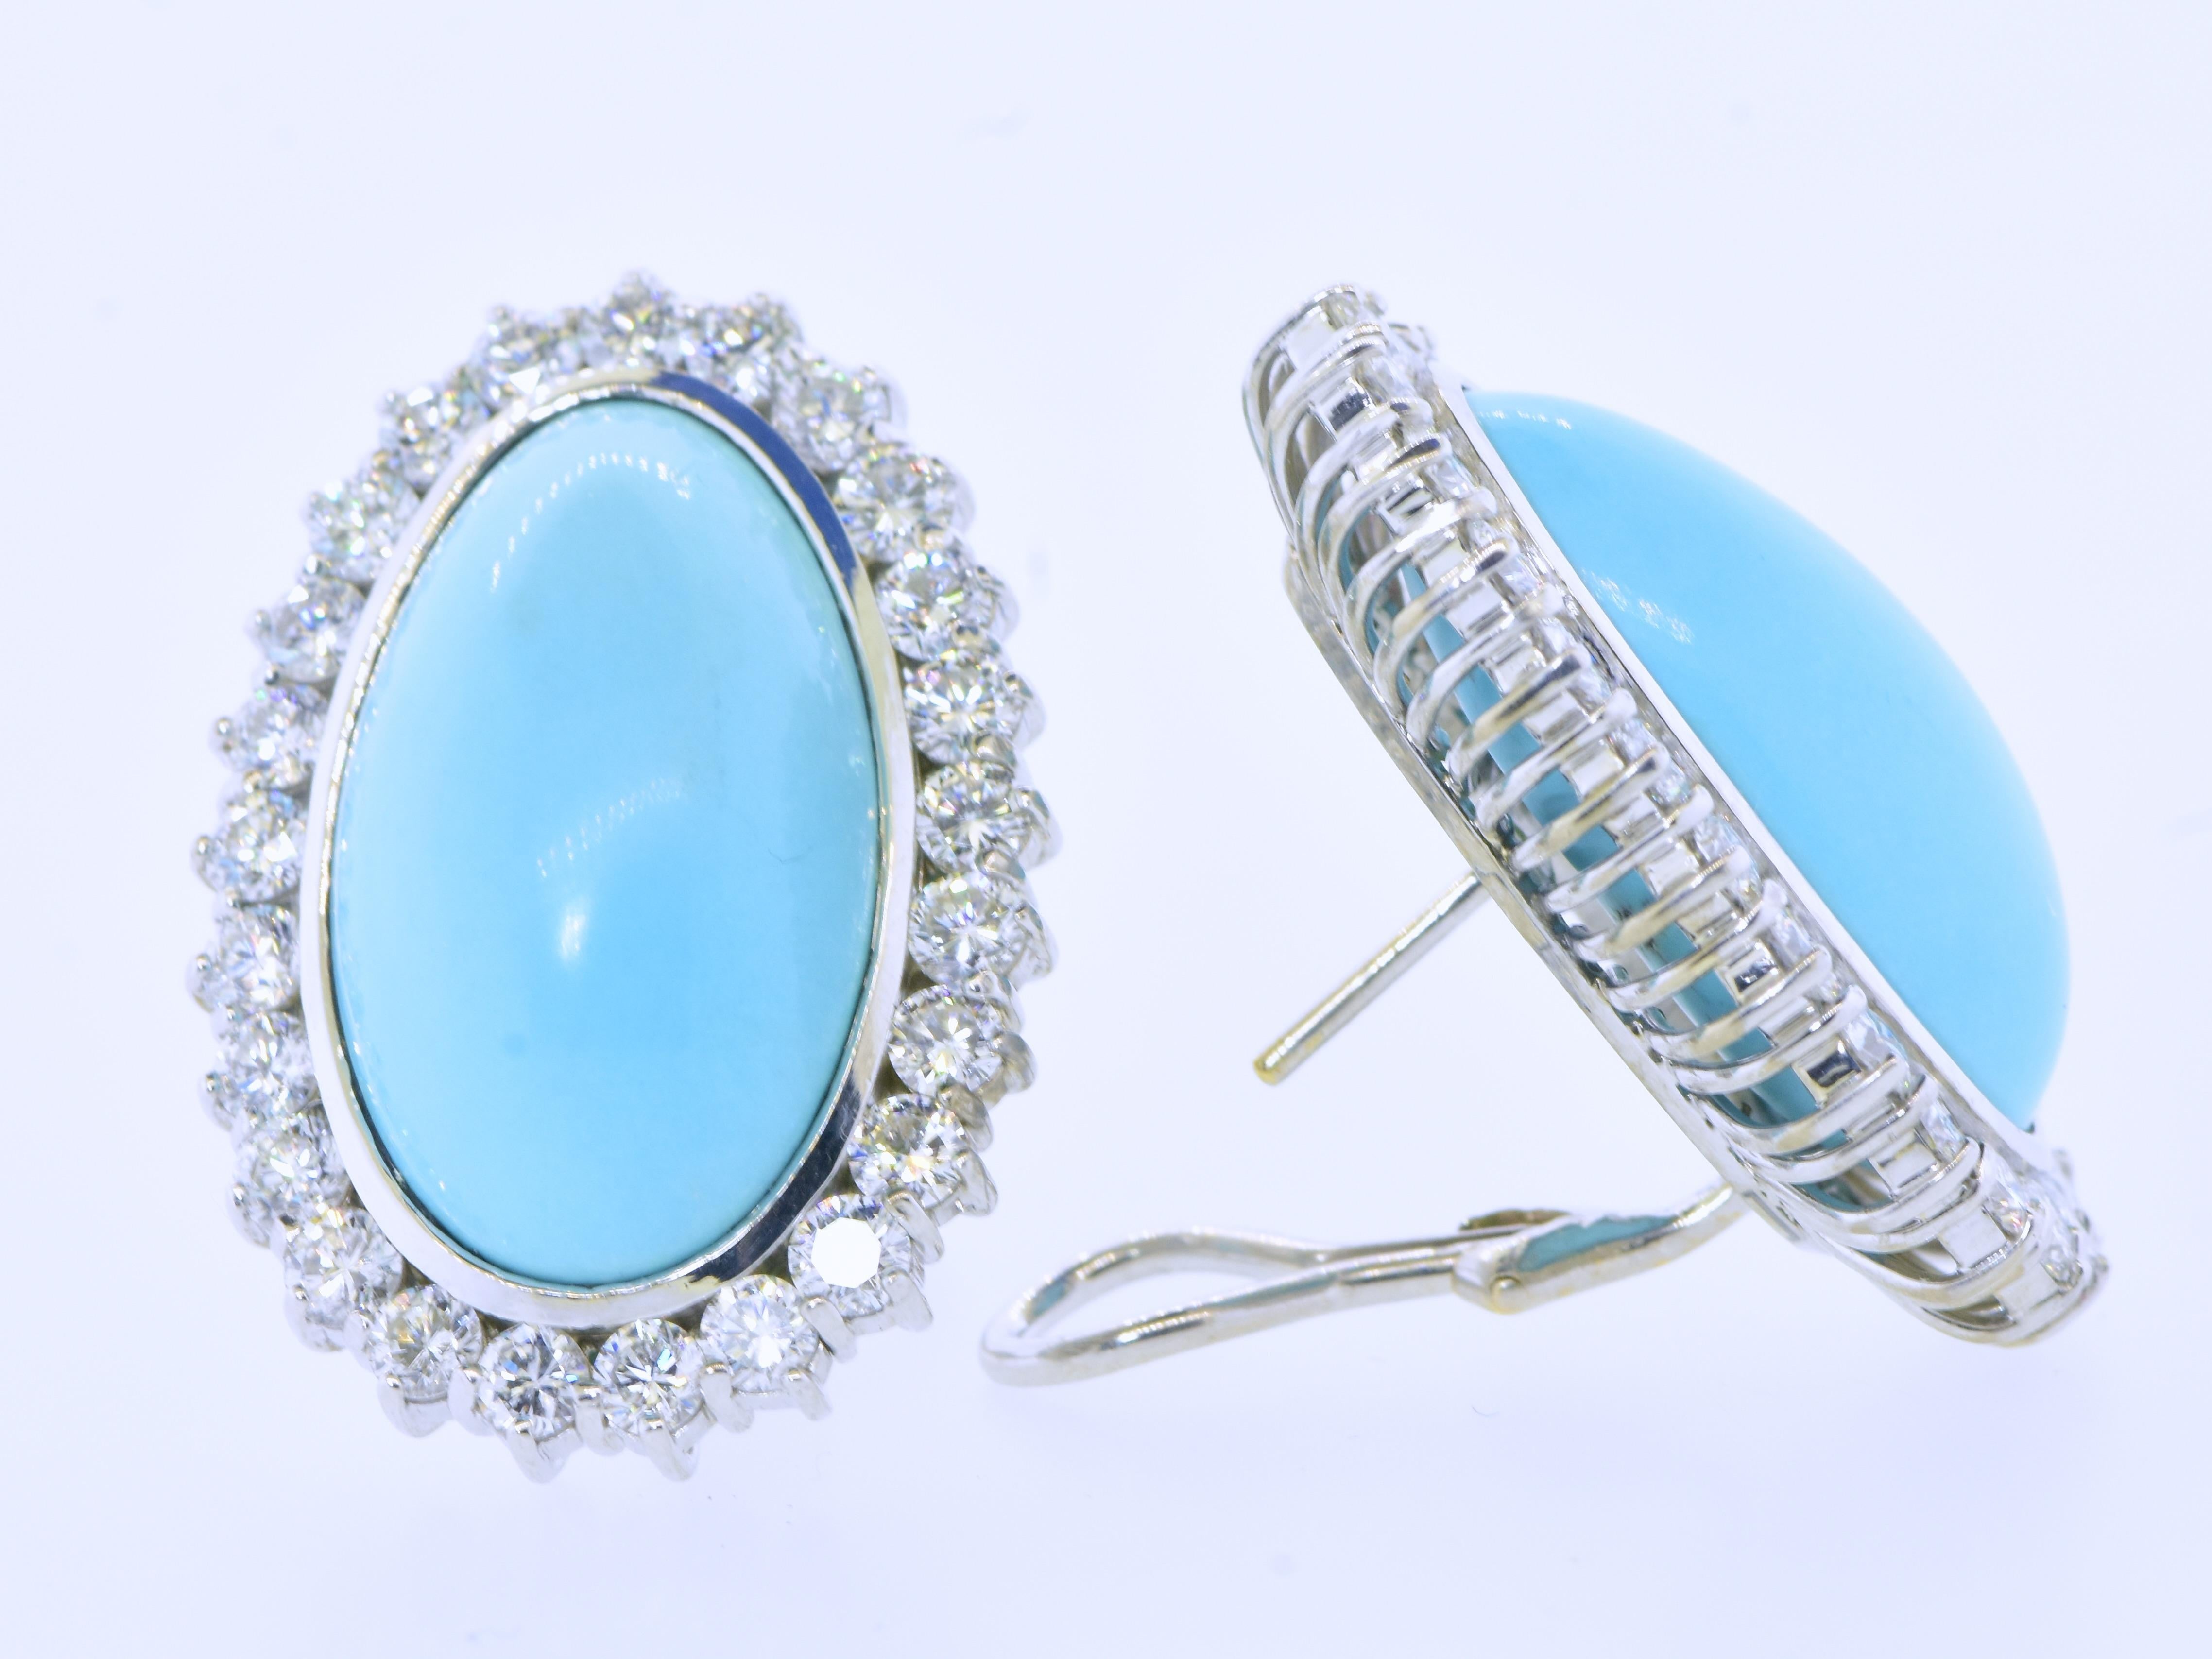 Large and Important Fine Turquoise & Diamond, 18K White Gold Earrings, c. 1990 In Excellent Condition For Sale In Aspen, CO